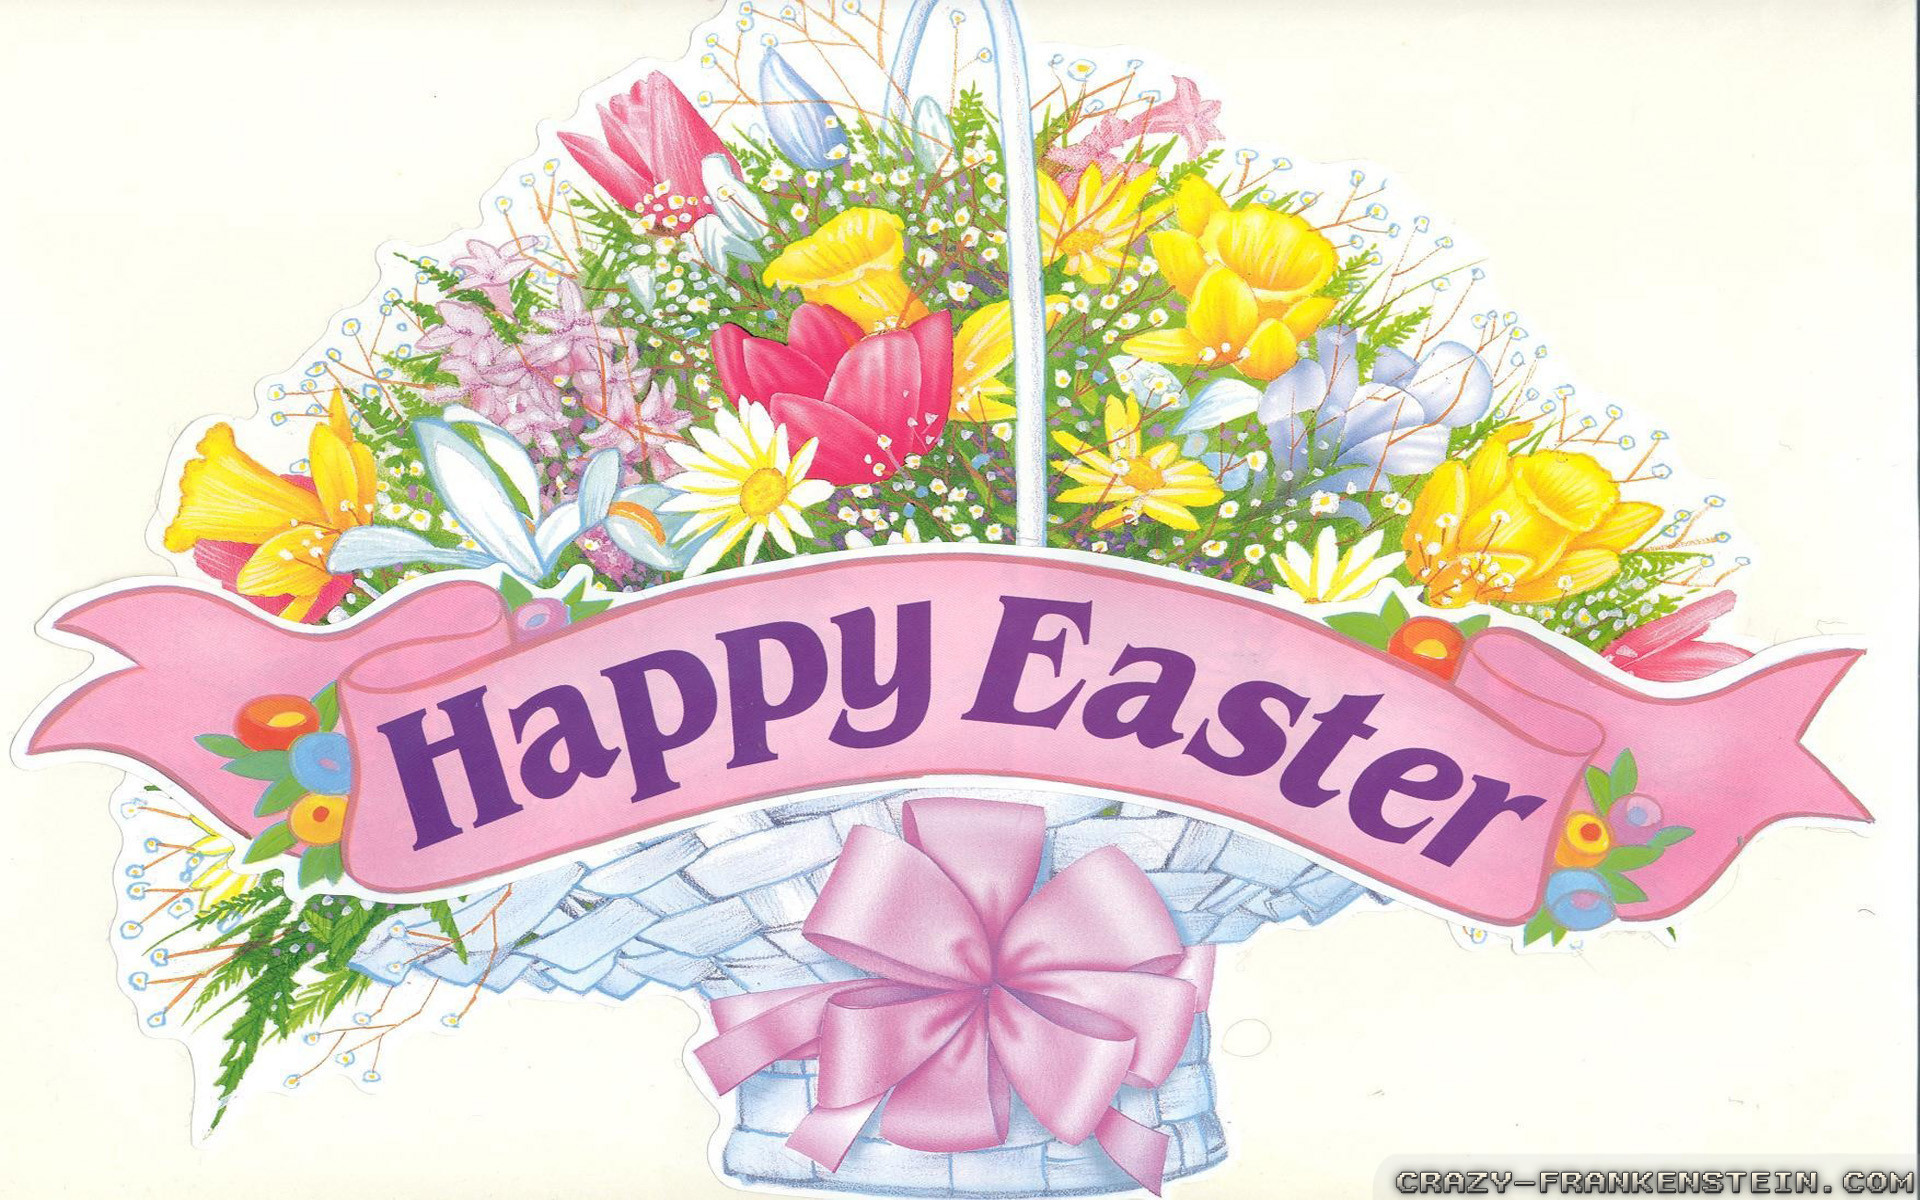 1920x1200 Videos Â· Home > Wallpapers > Easter wallpapers